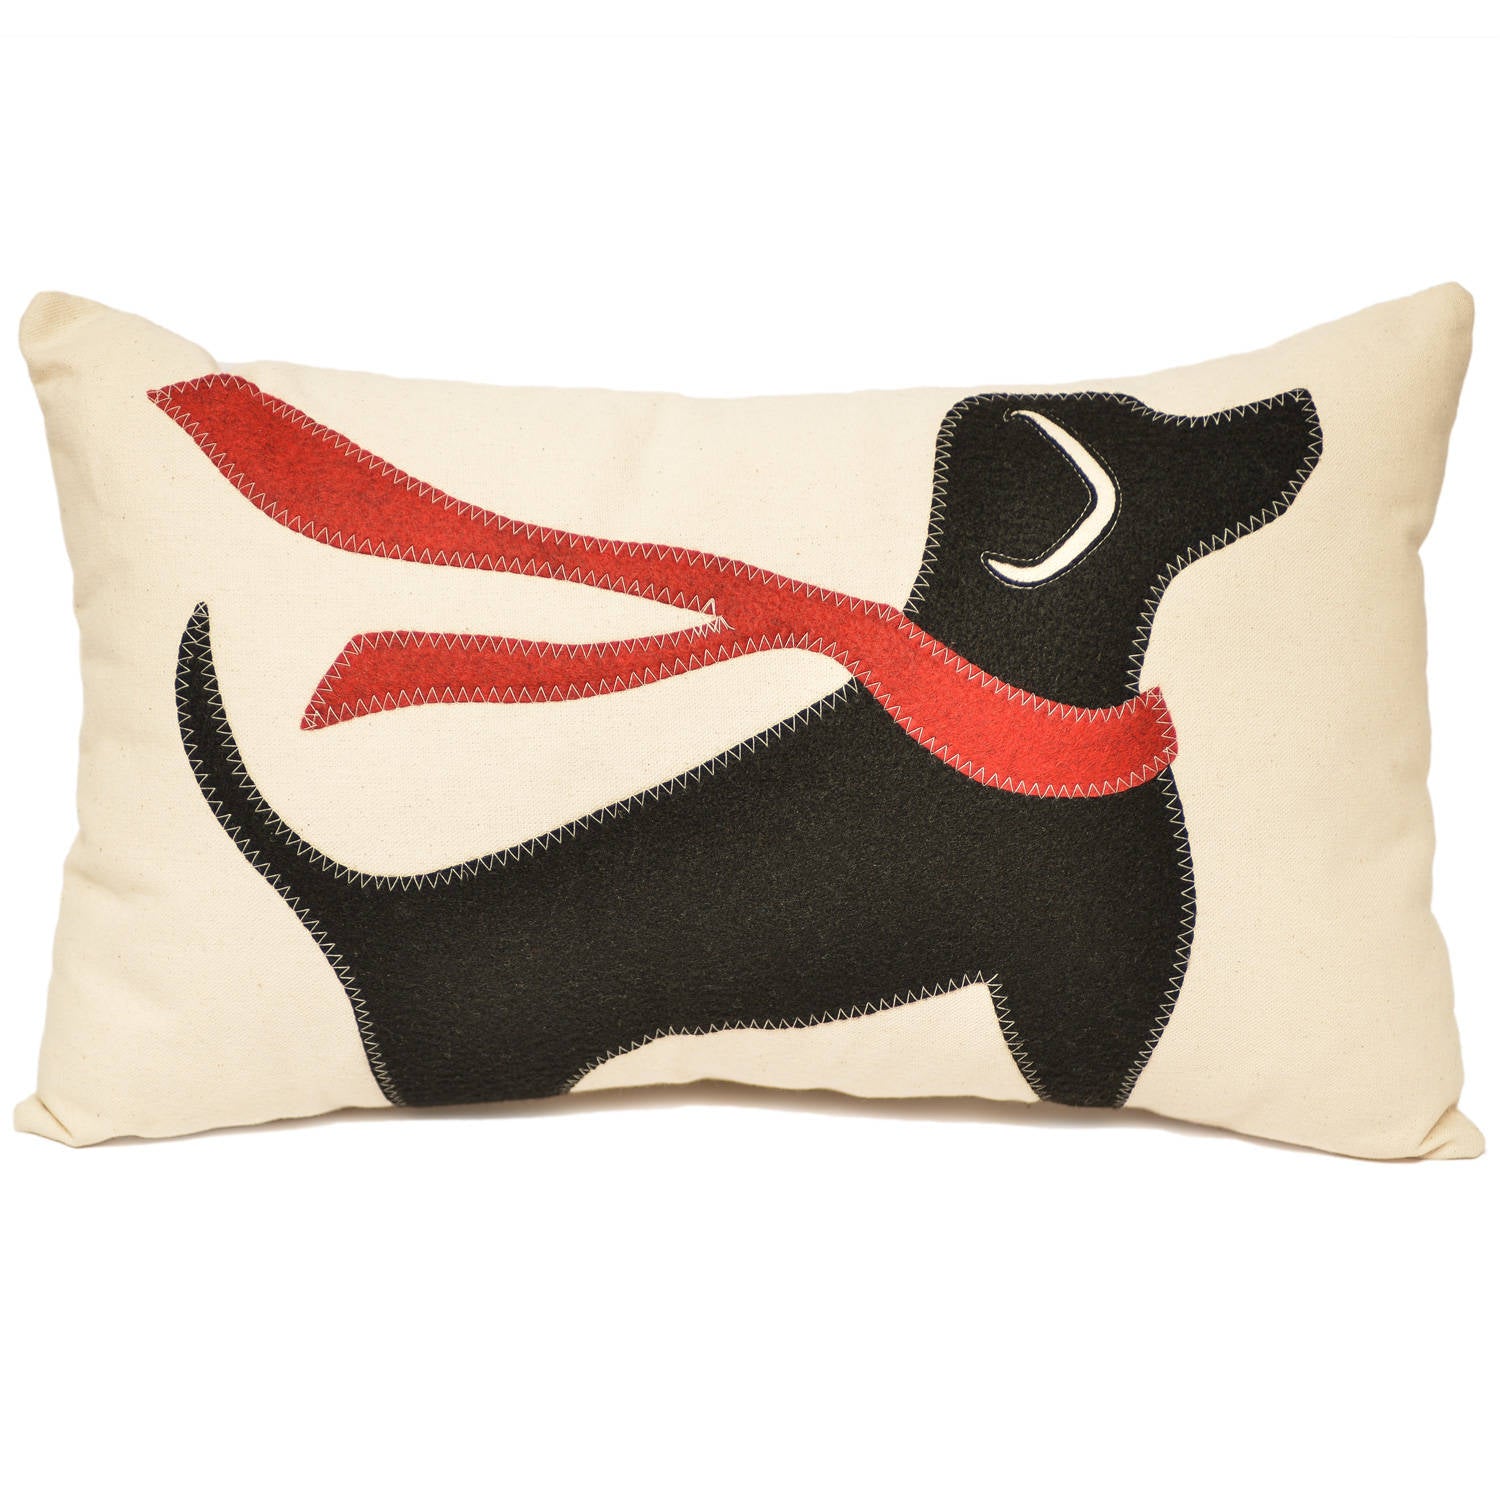 14x21" Max the Black lab with wintry scarf lumbar pillow